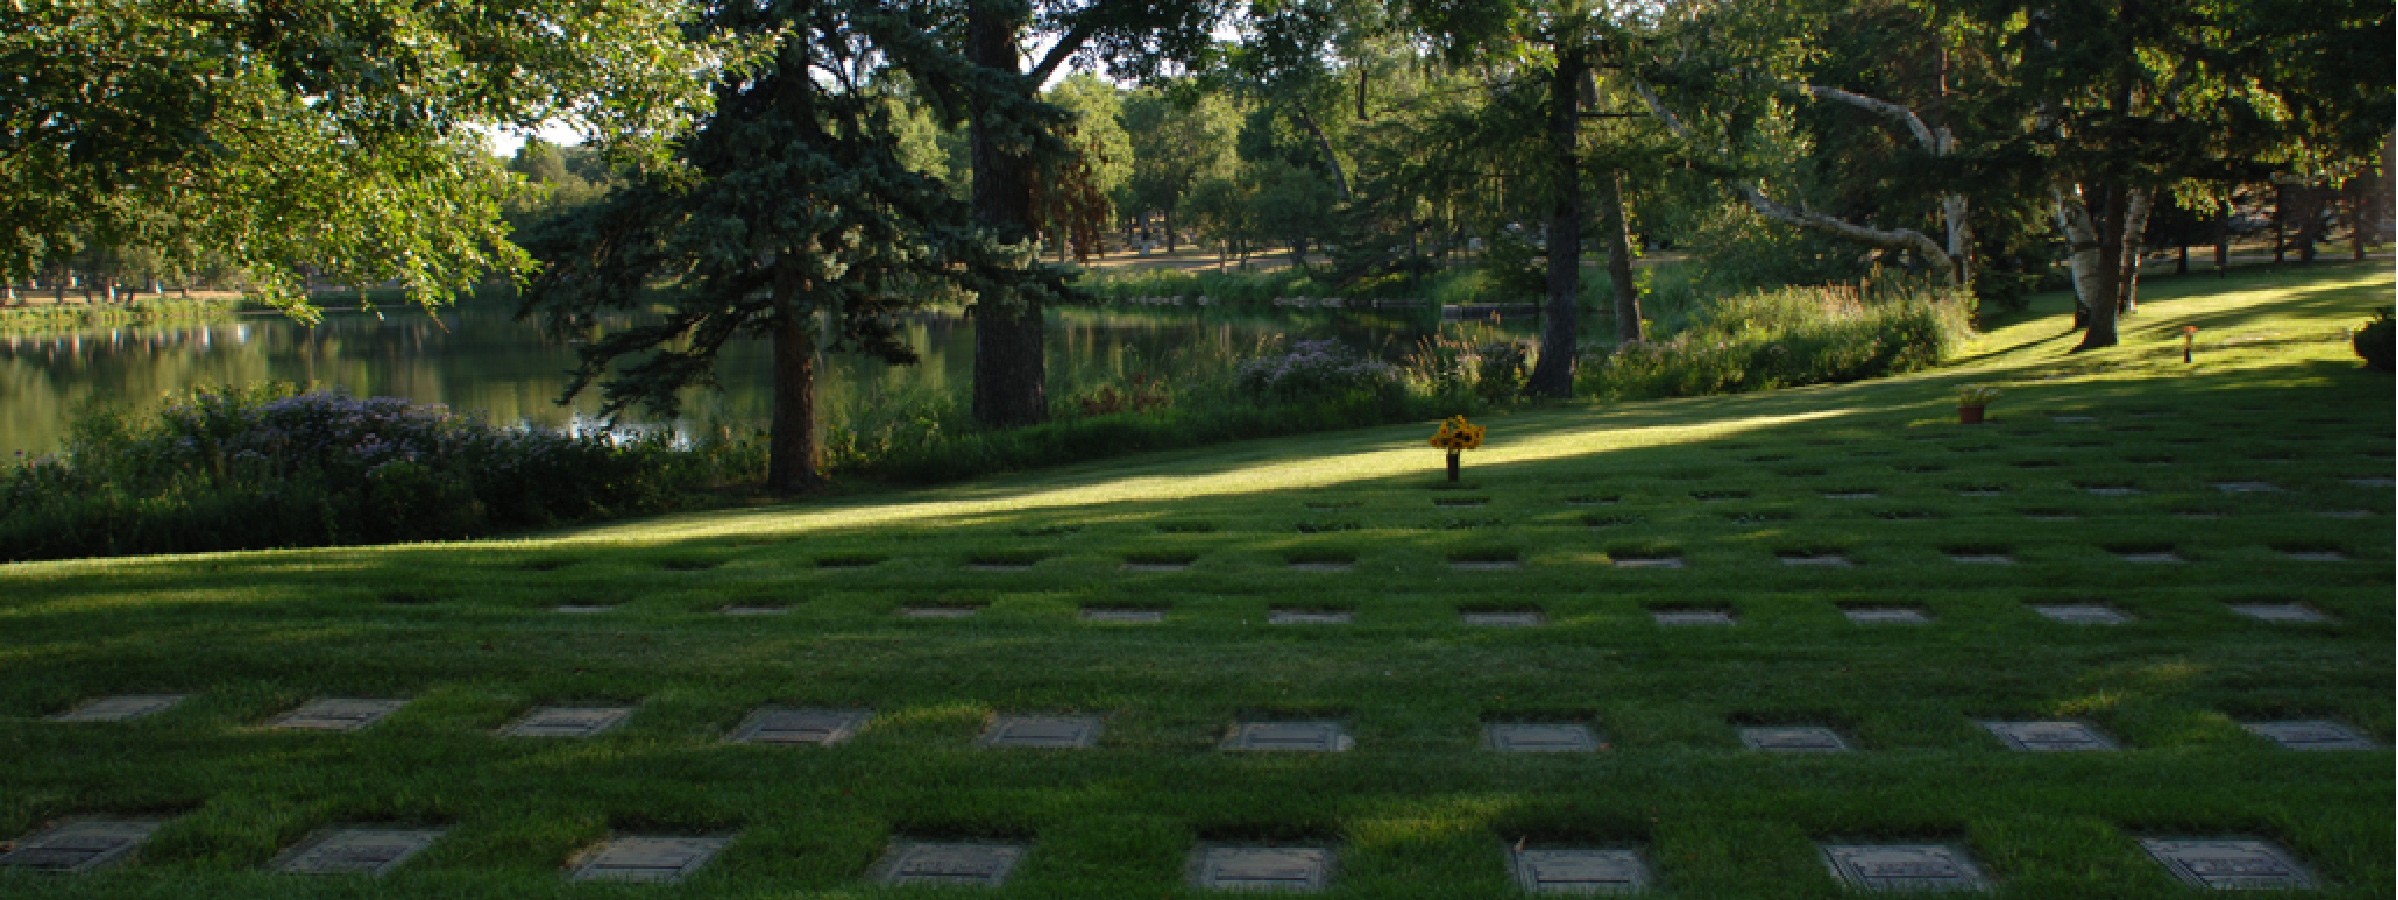 View of a grassy cemetary with ground markers